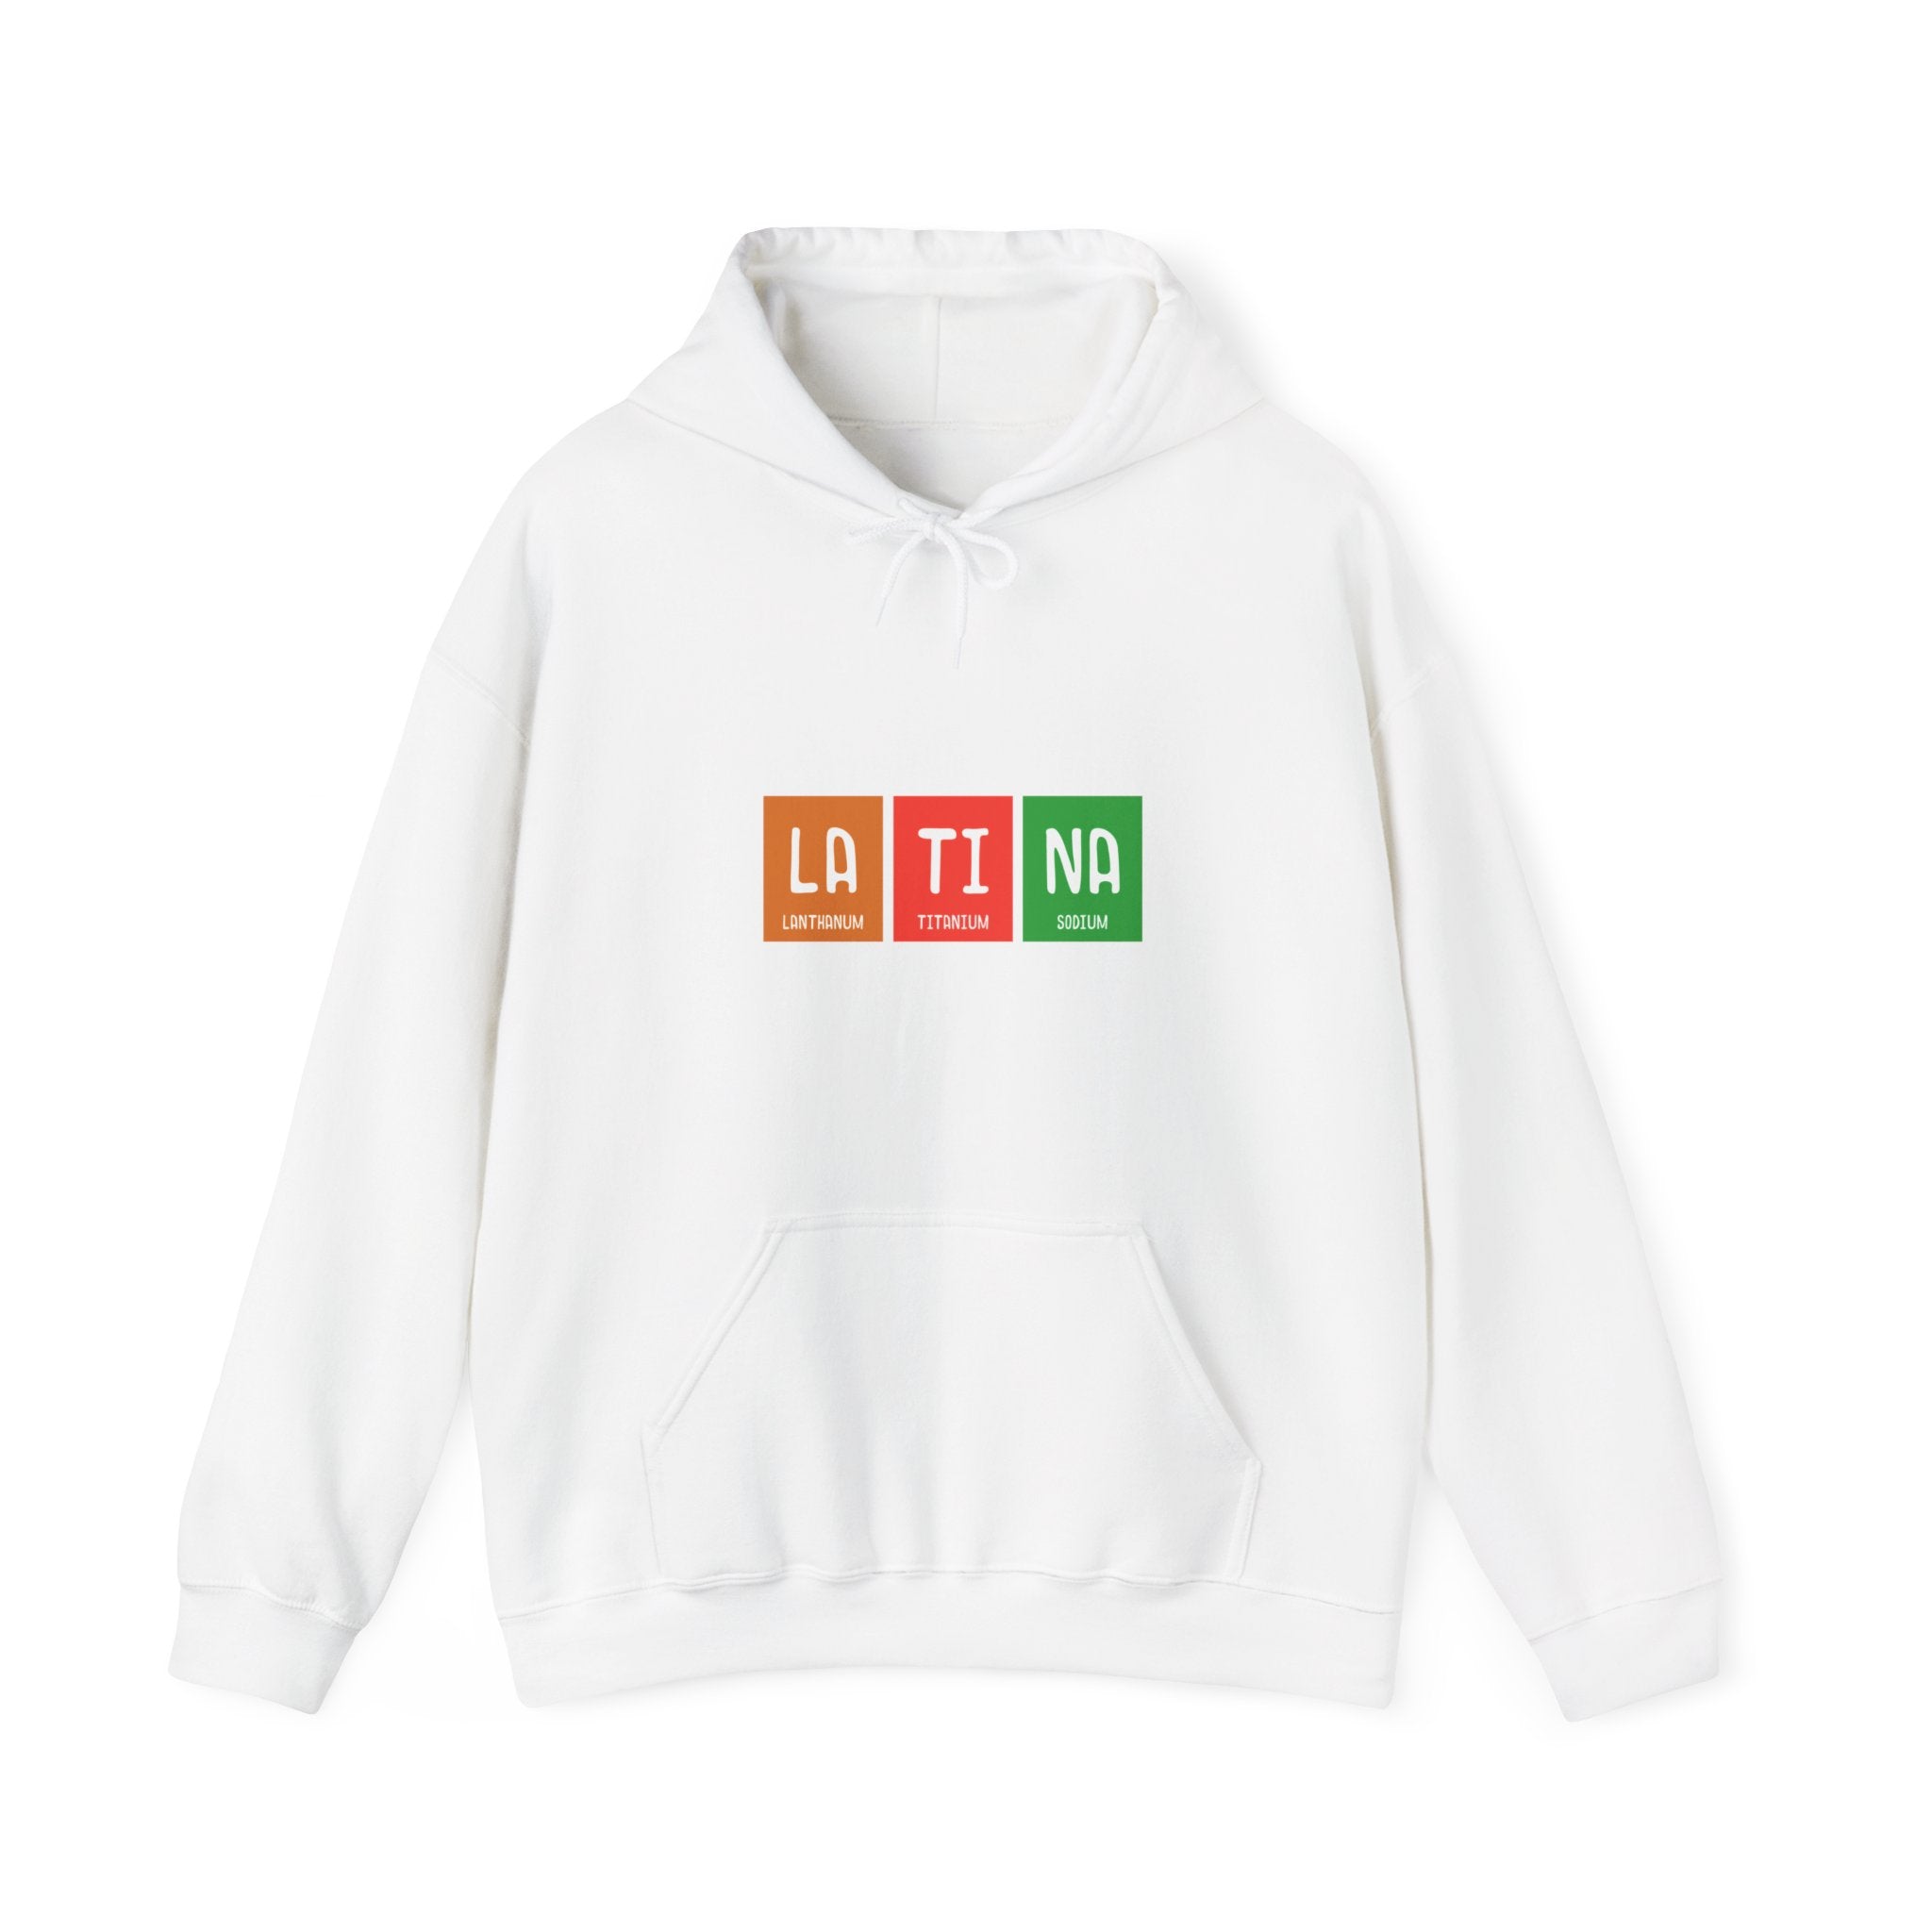 A LA-TI-NA - Hooded Sweatshirt featuring a vibrant design with three colored squares. Each square displays two letters: "LA" in red, "TI" in orange, and "NA" in green, forming the word "LATINA".